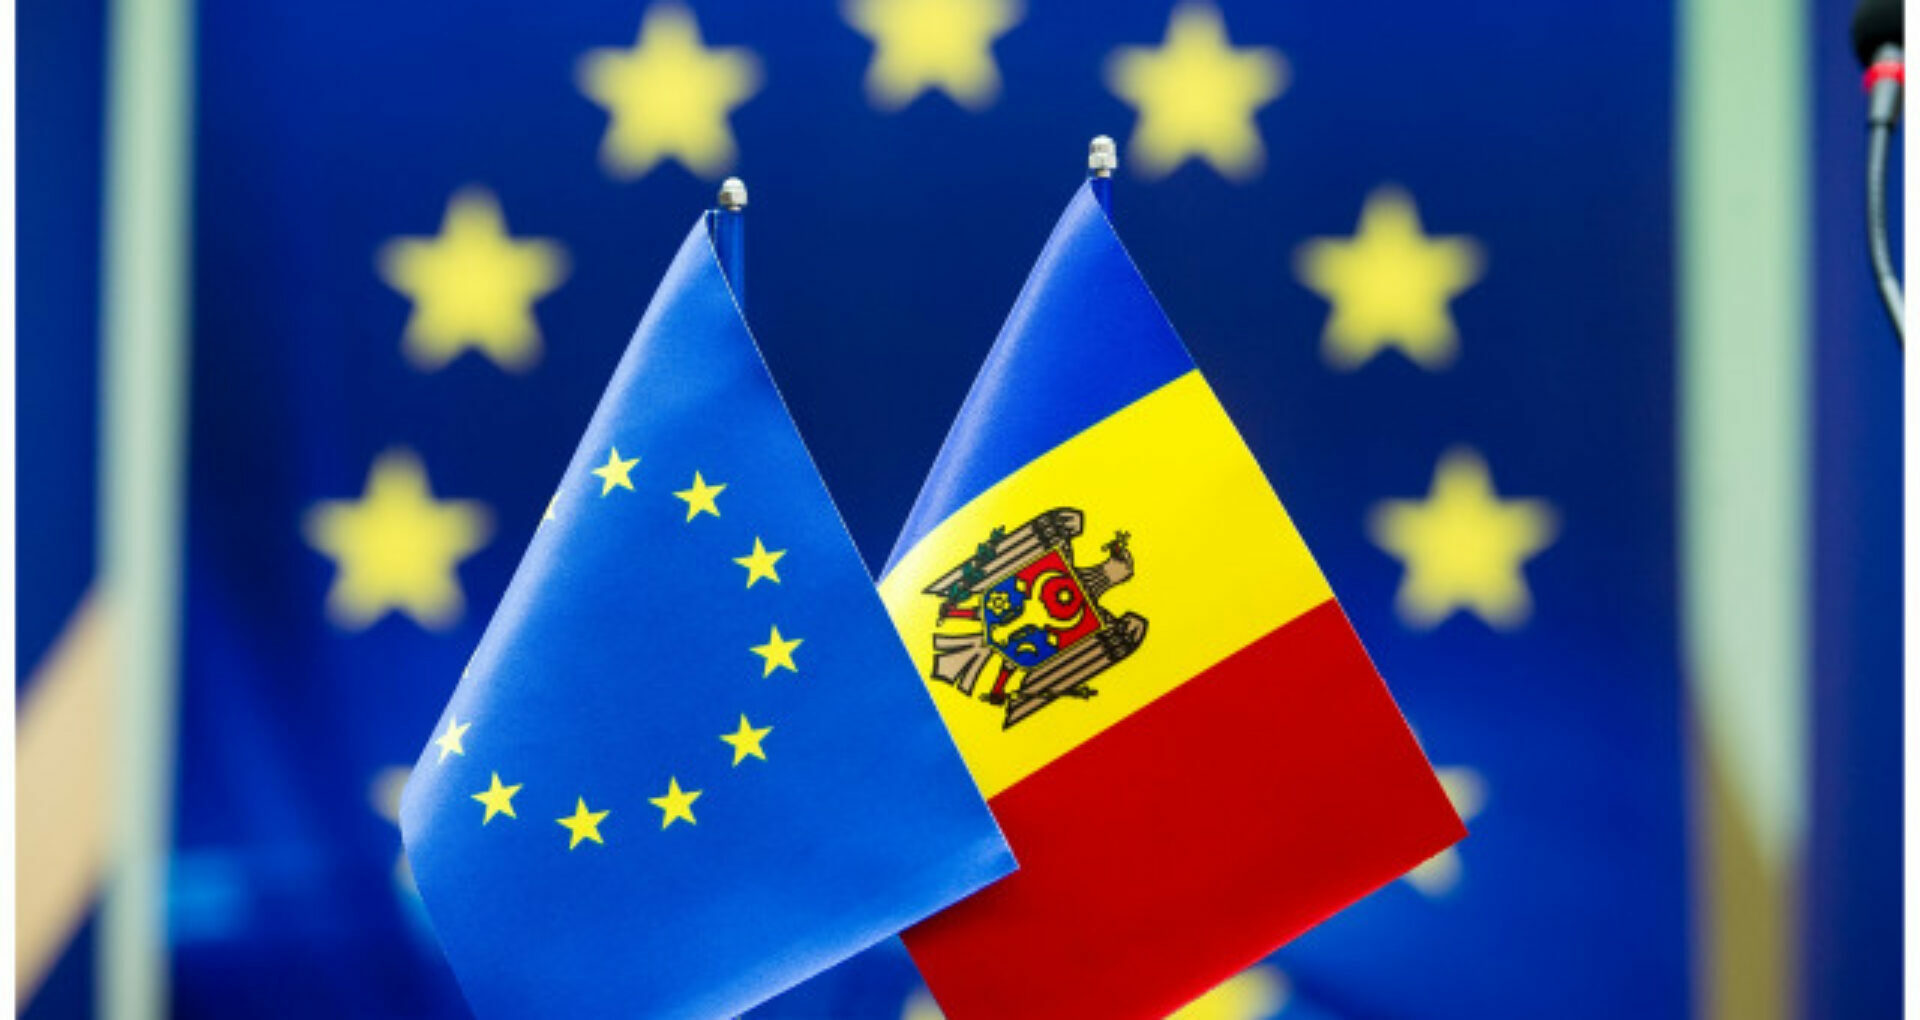 EU SUPPORT: Up to 30,000 Euros for the Development of the Private Sector in Two Western Regions of Moldova.